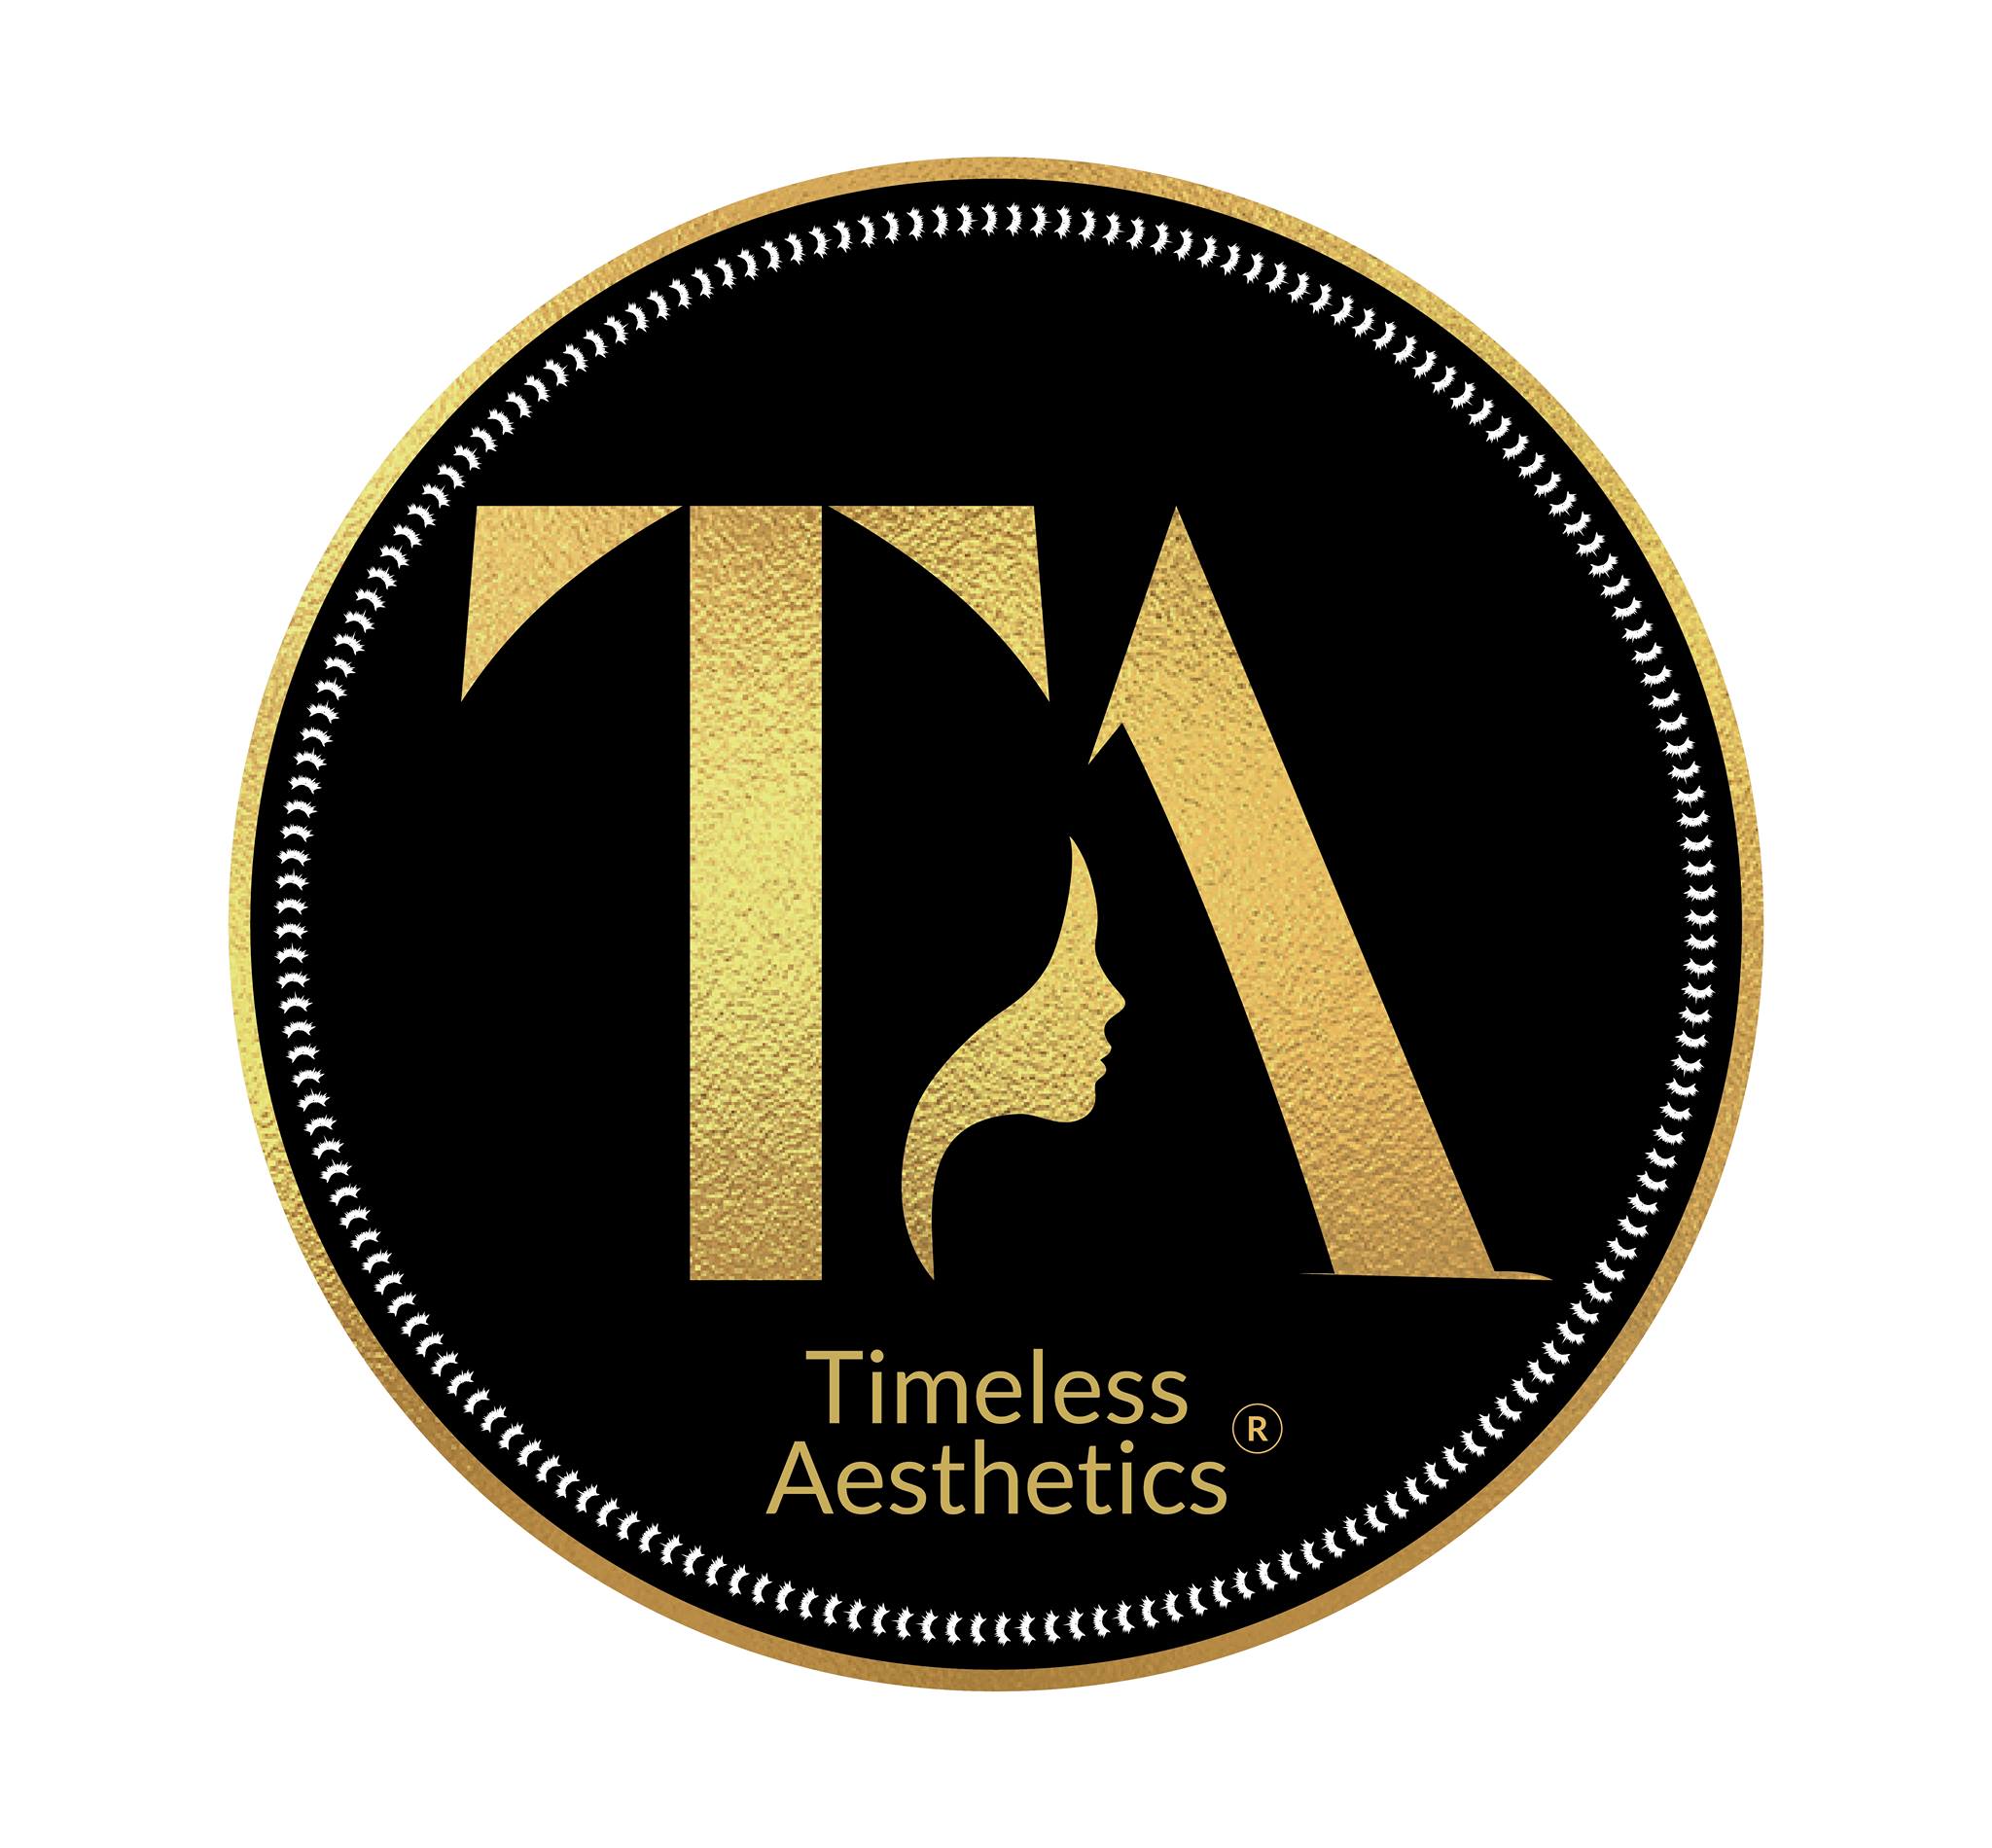 Timeless Aesthetics|Ecommerce Business|Professional Services